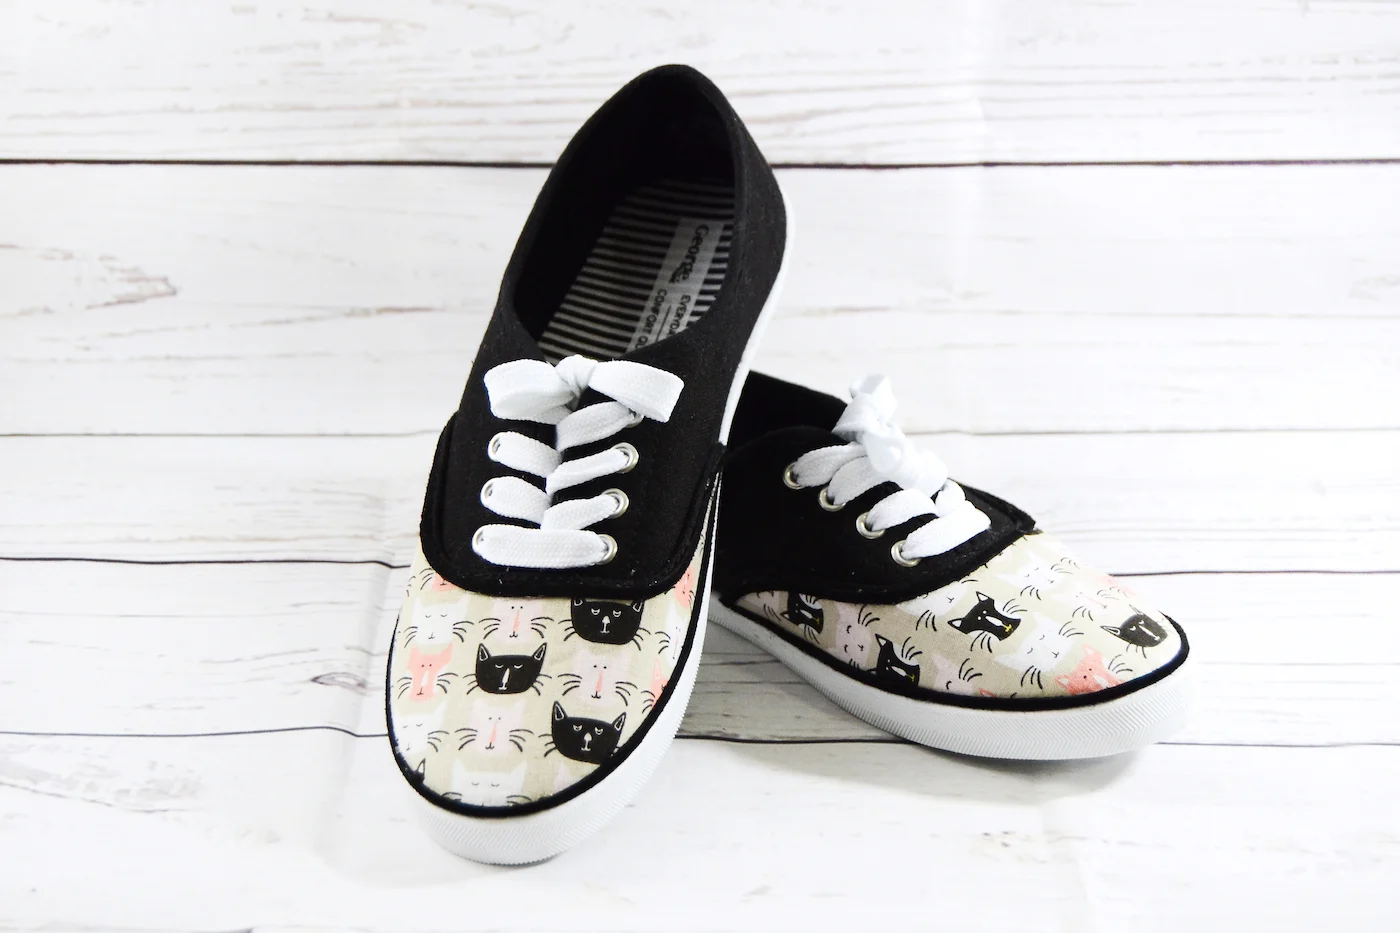 Paint your trainers  Canvas shoes diy, Decorated shoes, Painted